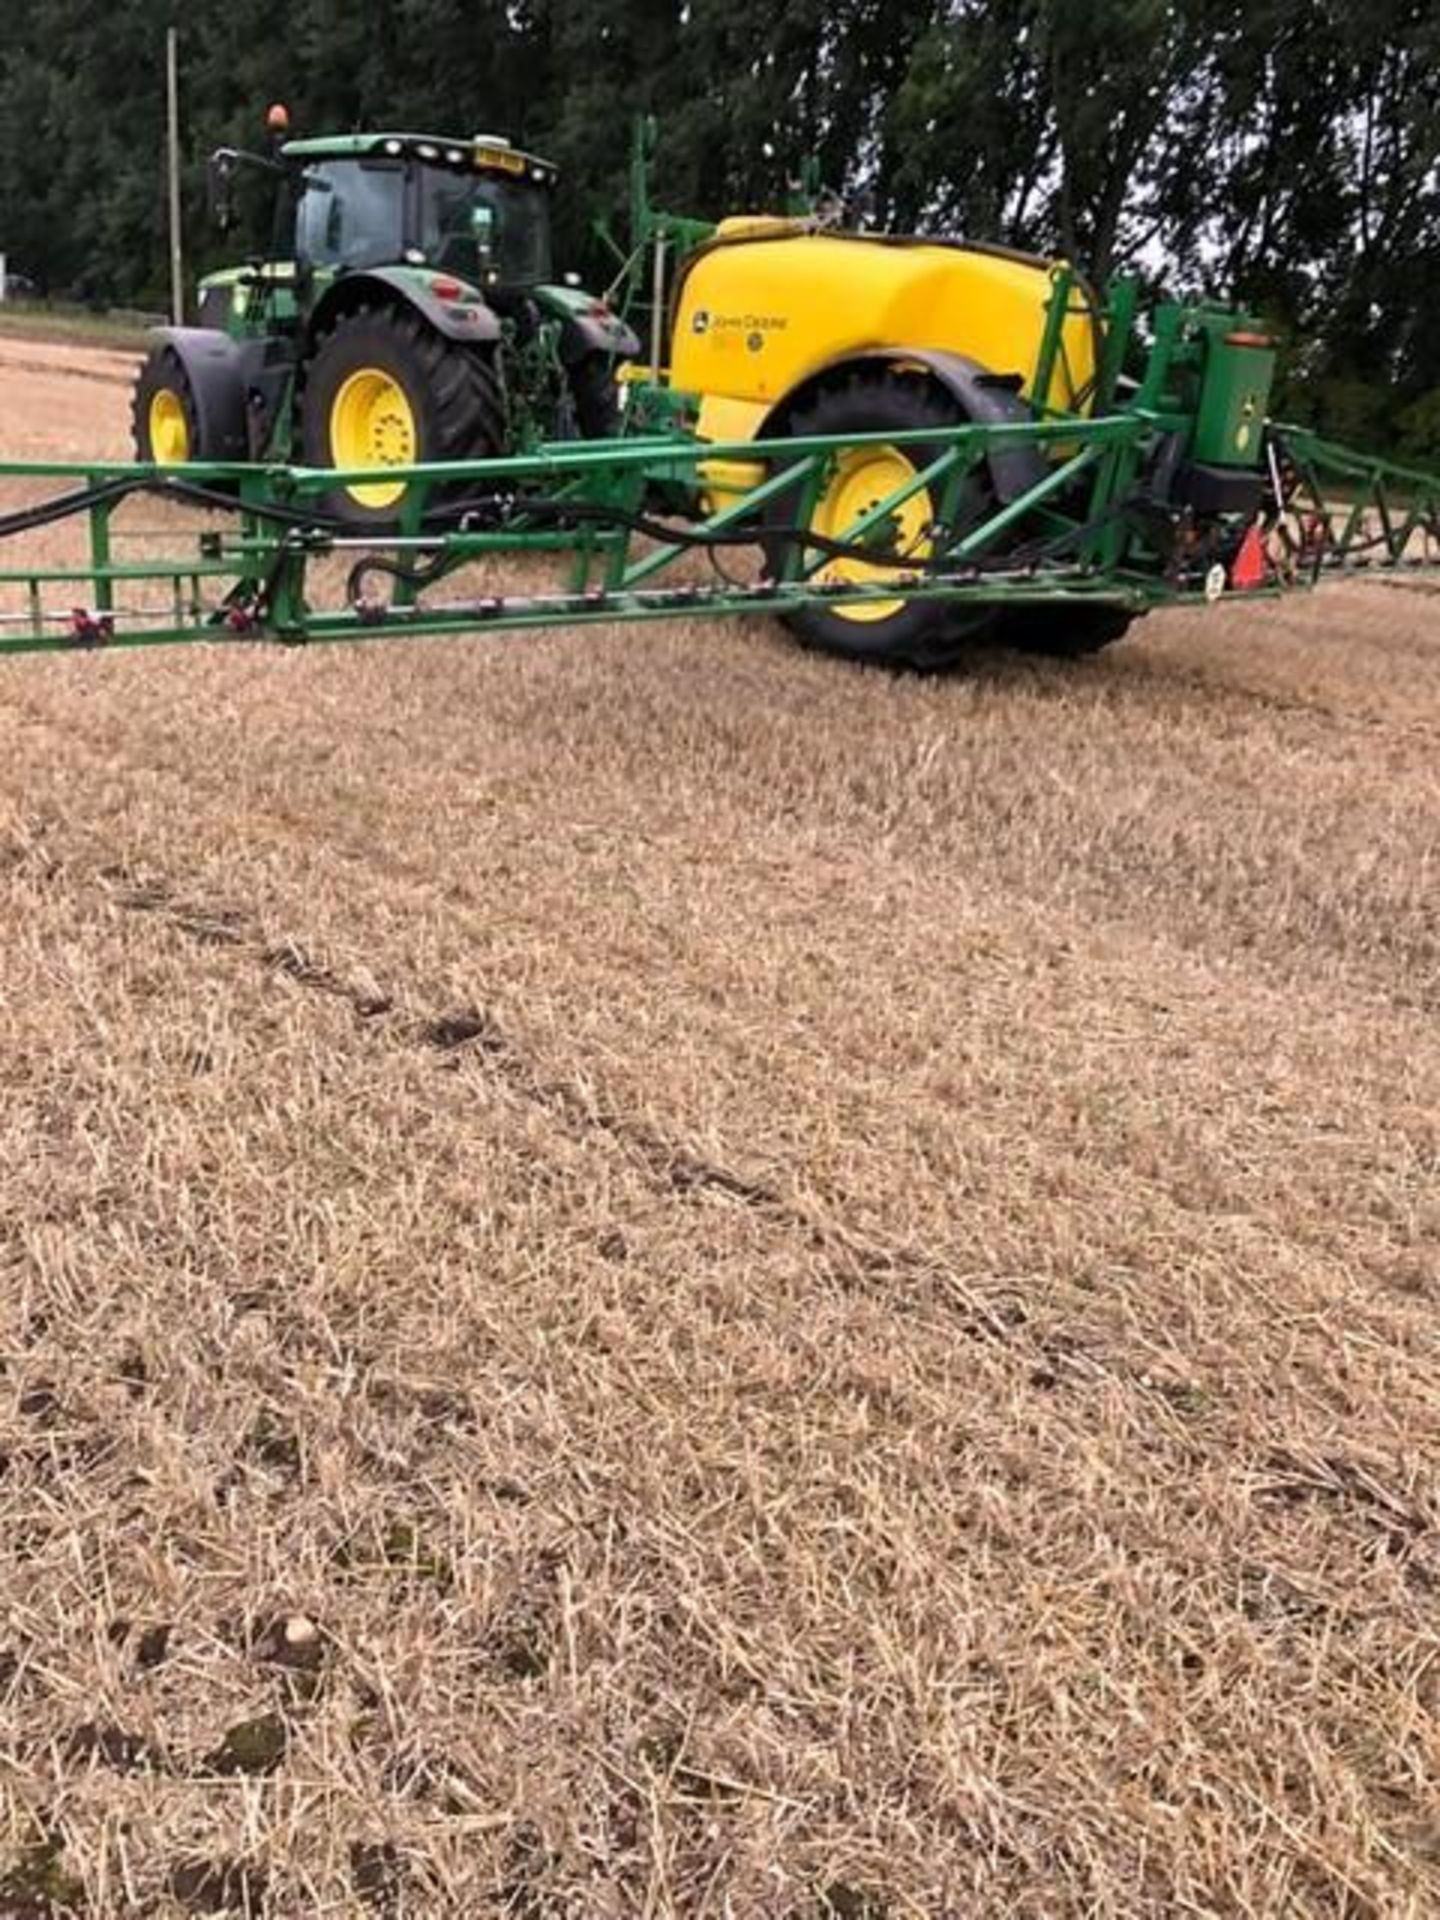 2017 John Deere M740i 24m trailed sprayer, 4000l tank on 520/85R38 wheels and tyres. Hectares: c.12, - Image 6 of 14